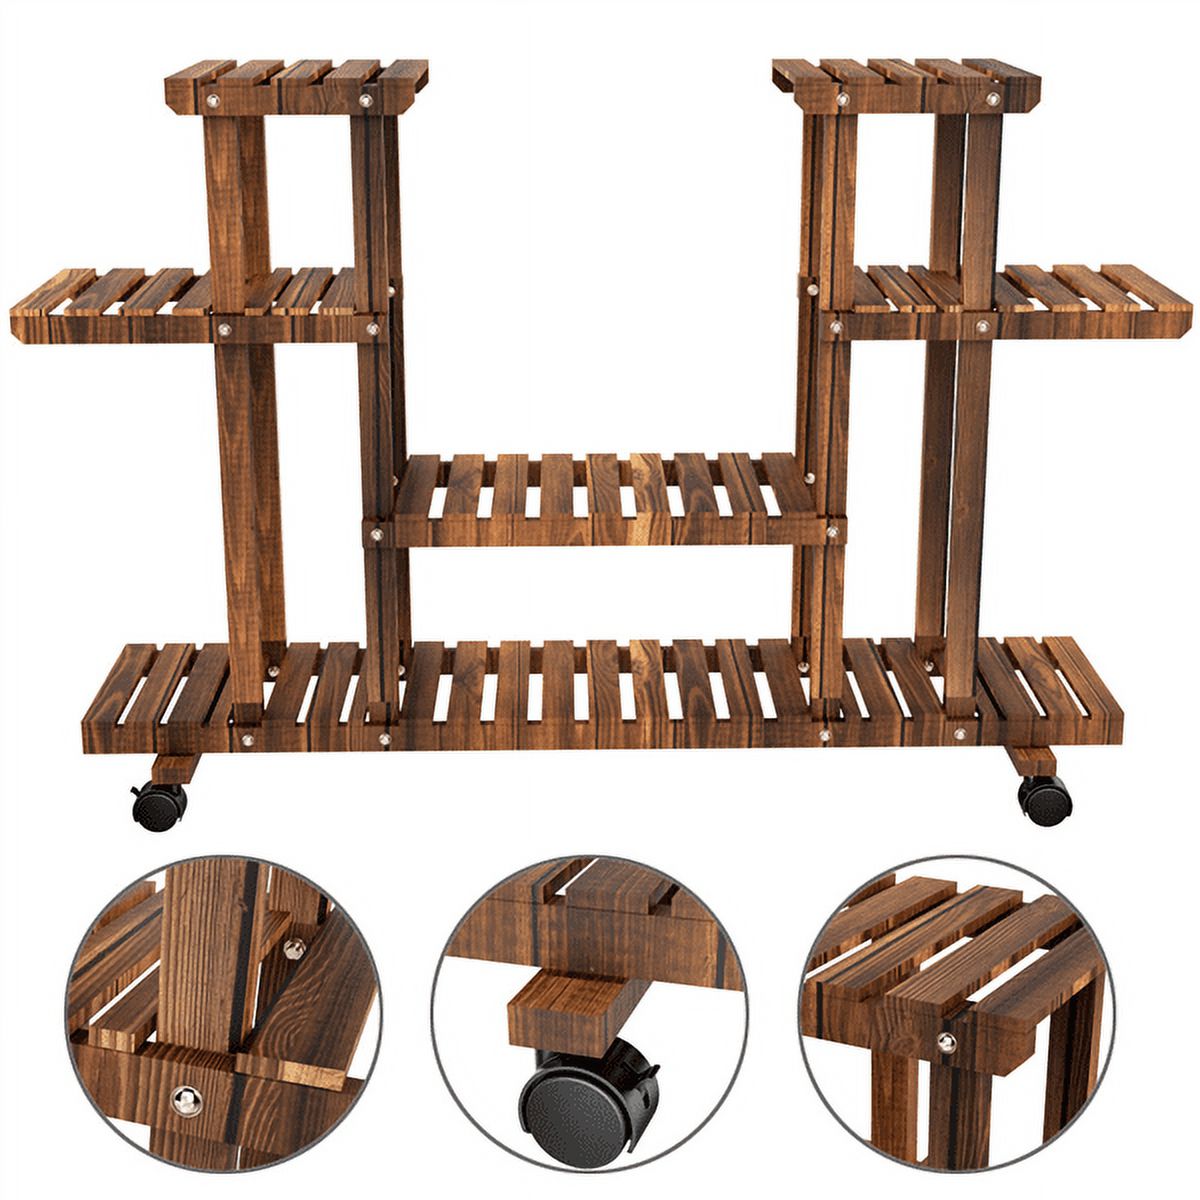 SmileMart 4-Tier 6-Shelf Rolling Wooden Flower Display Stand for Indoors or Outdoors - image 4 of 6